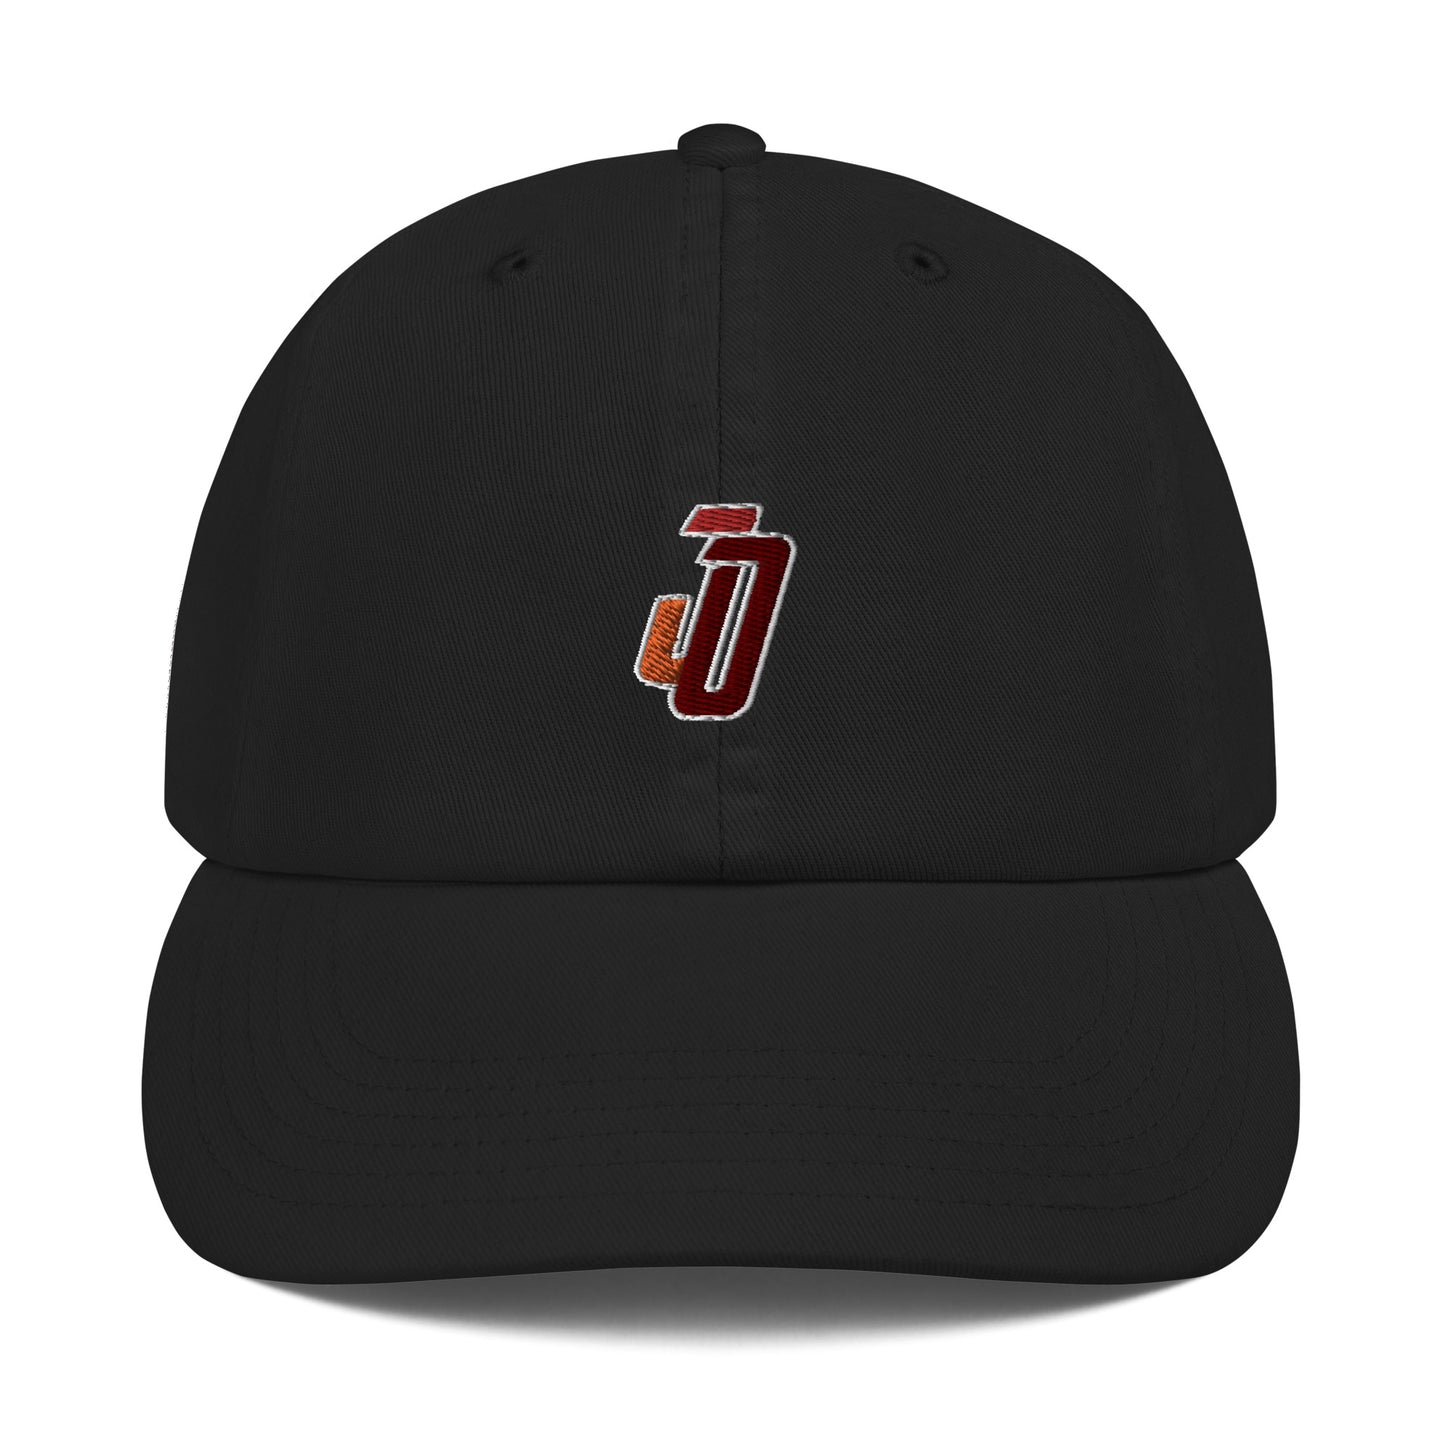 JO Embroidered Champion Dad Cap